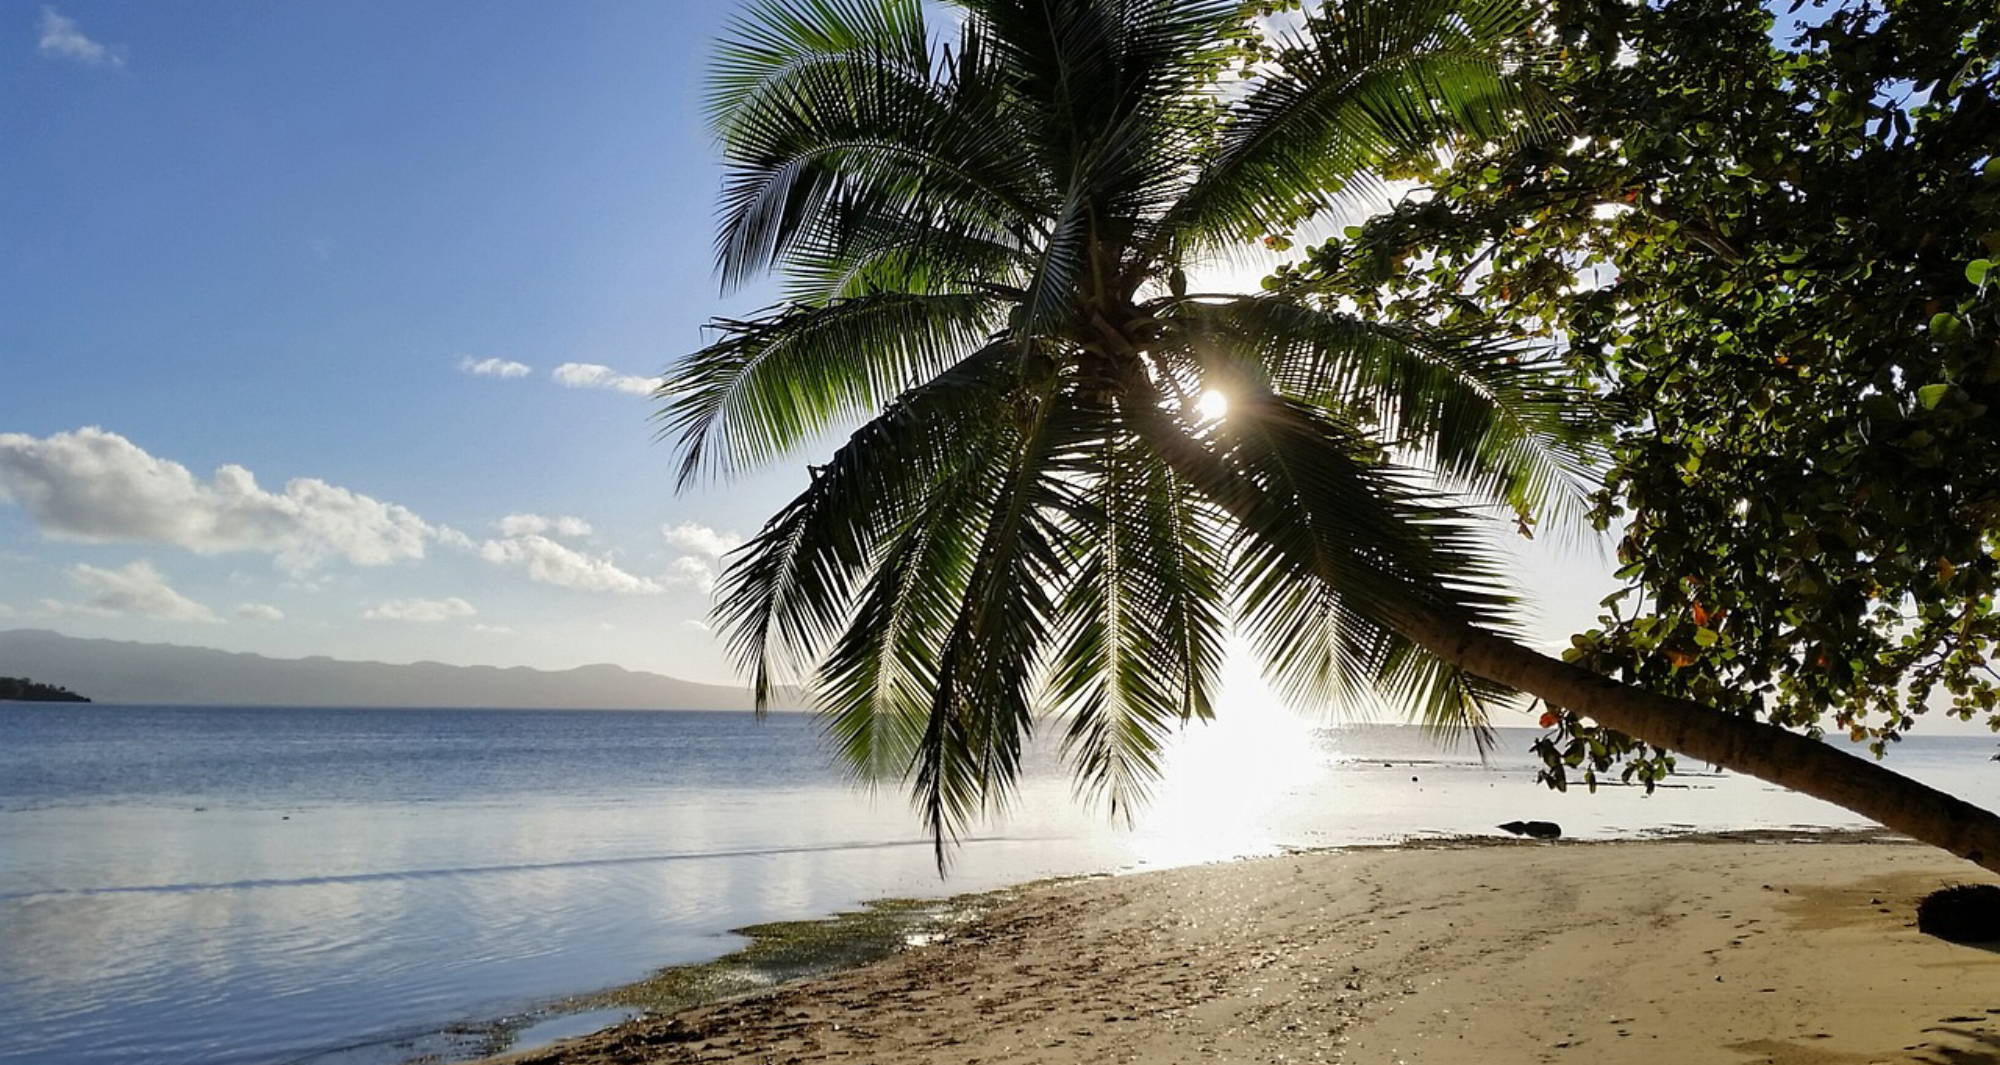 beach with calm waters and a palm tree with the sun shining through its fronds